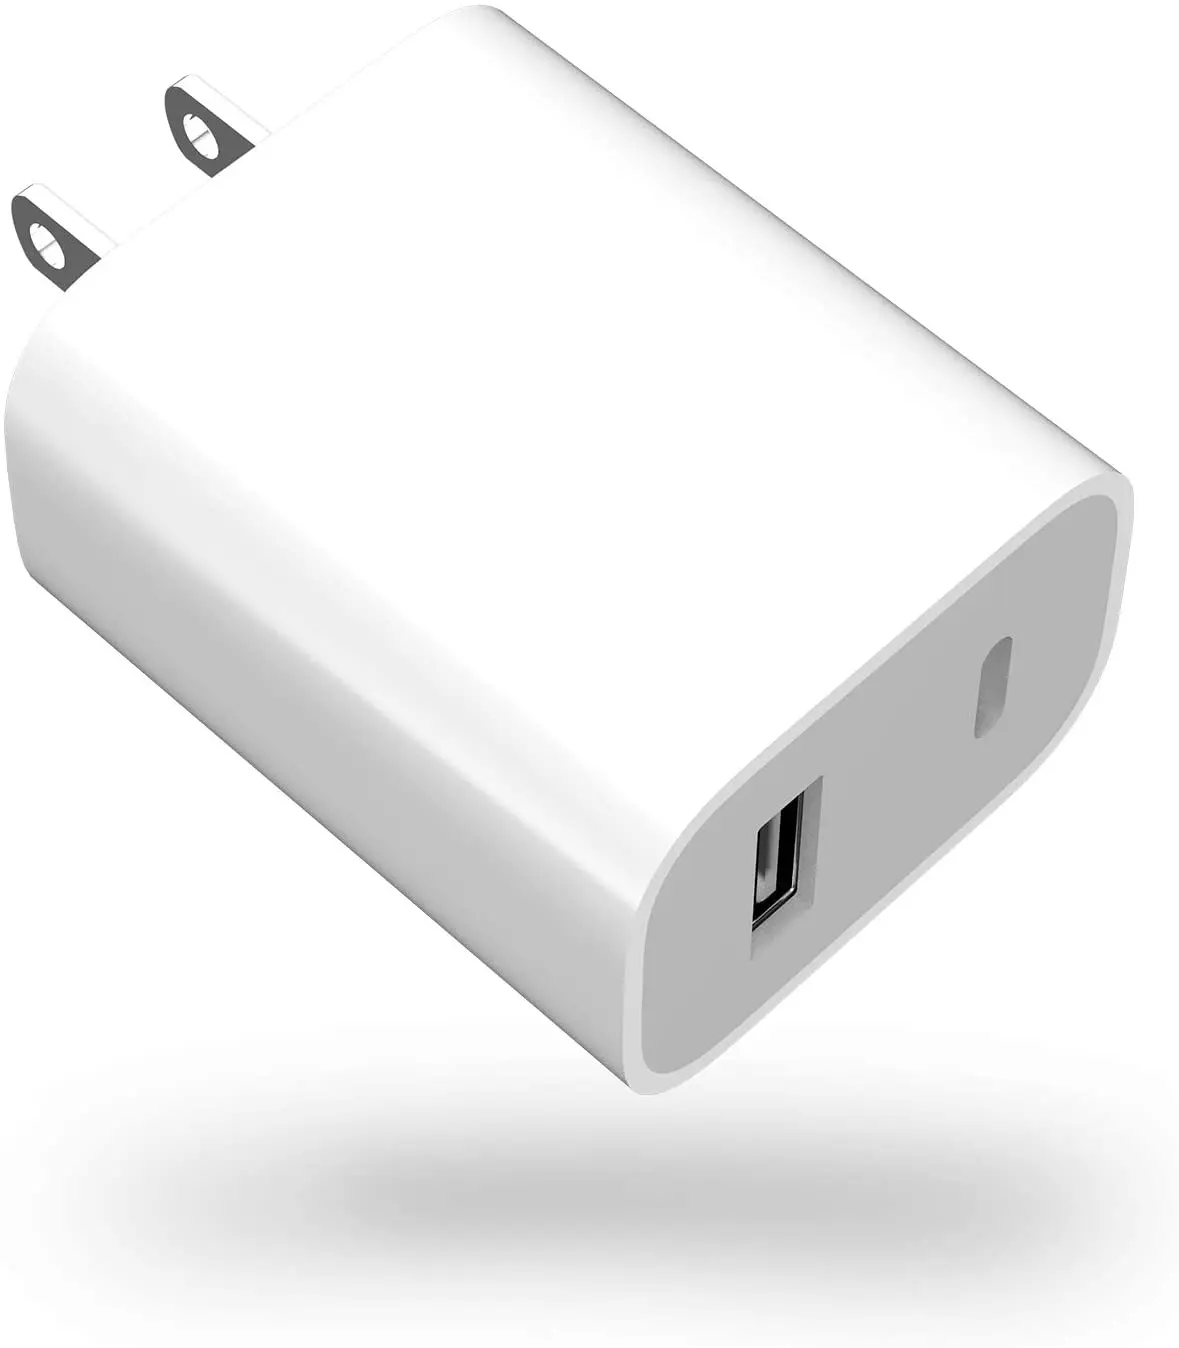 

Cellphone Qc Pd Charging Wall Travel 18 watt type c usb c 3.1a quick charge 3.0 fast charger uk